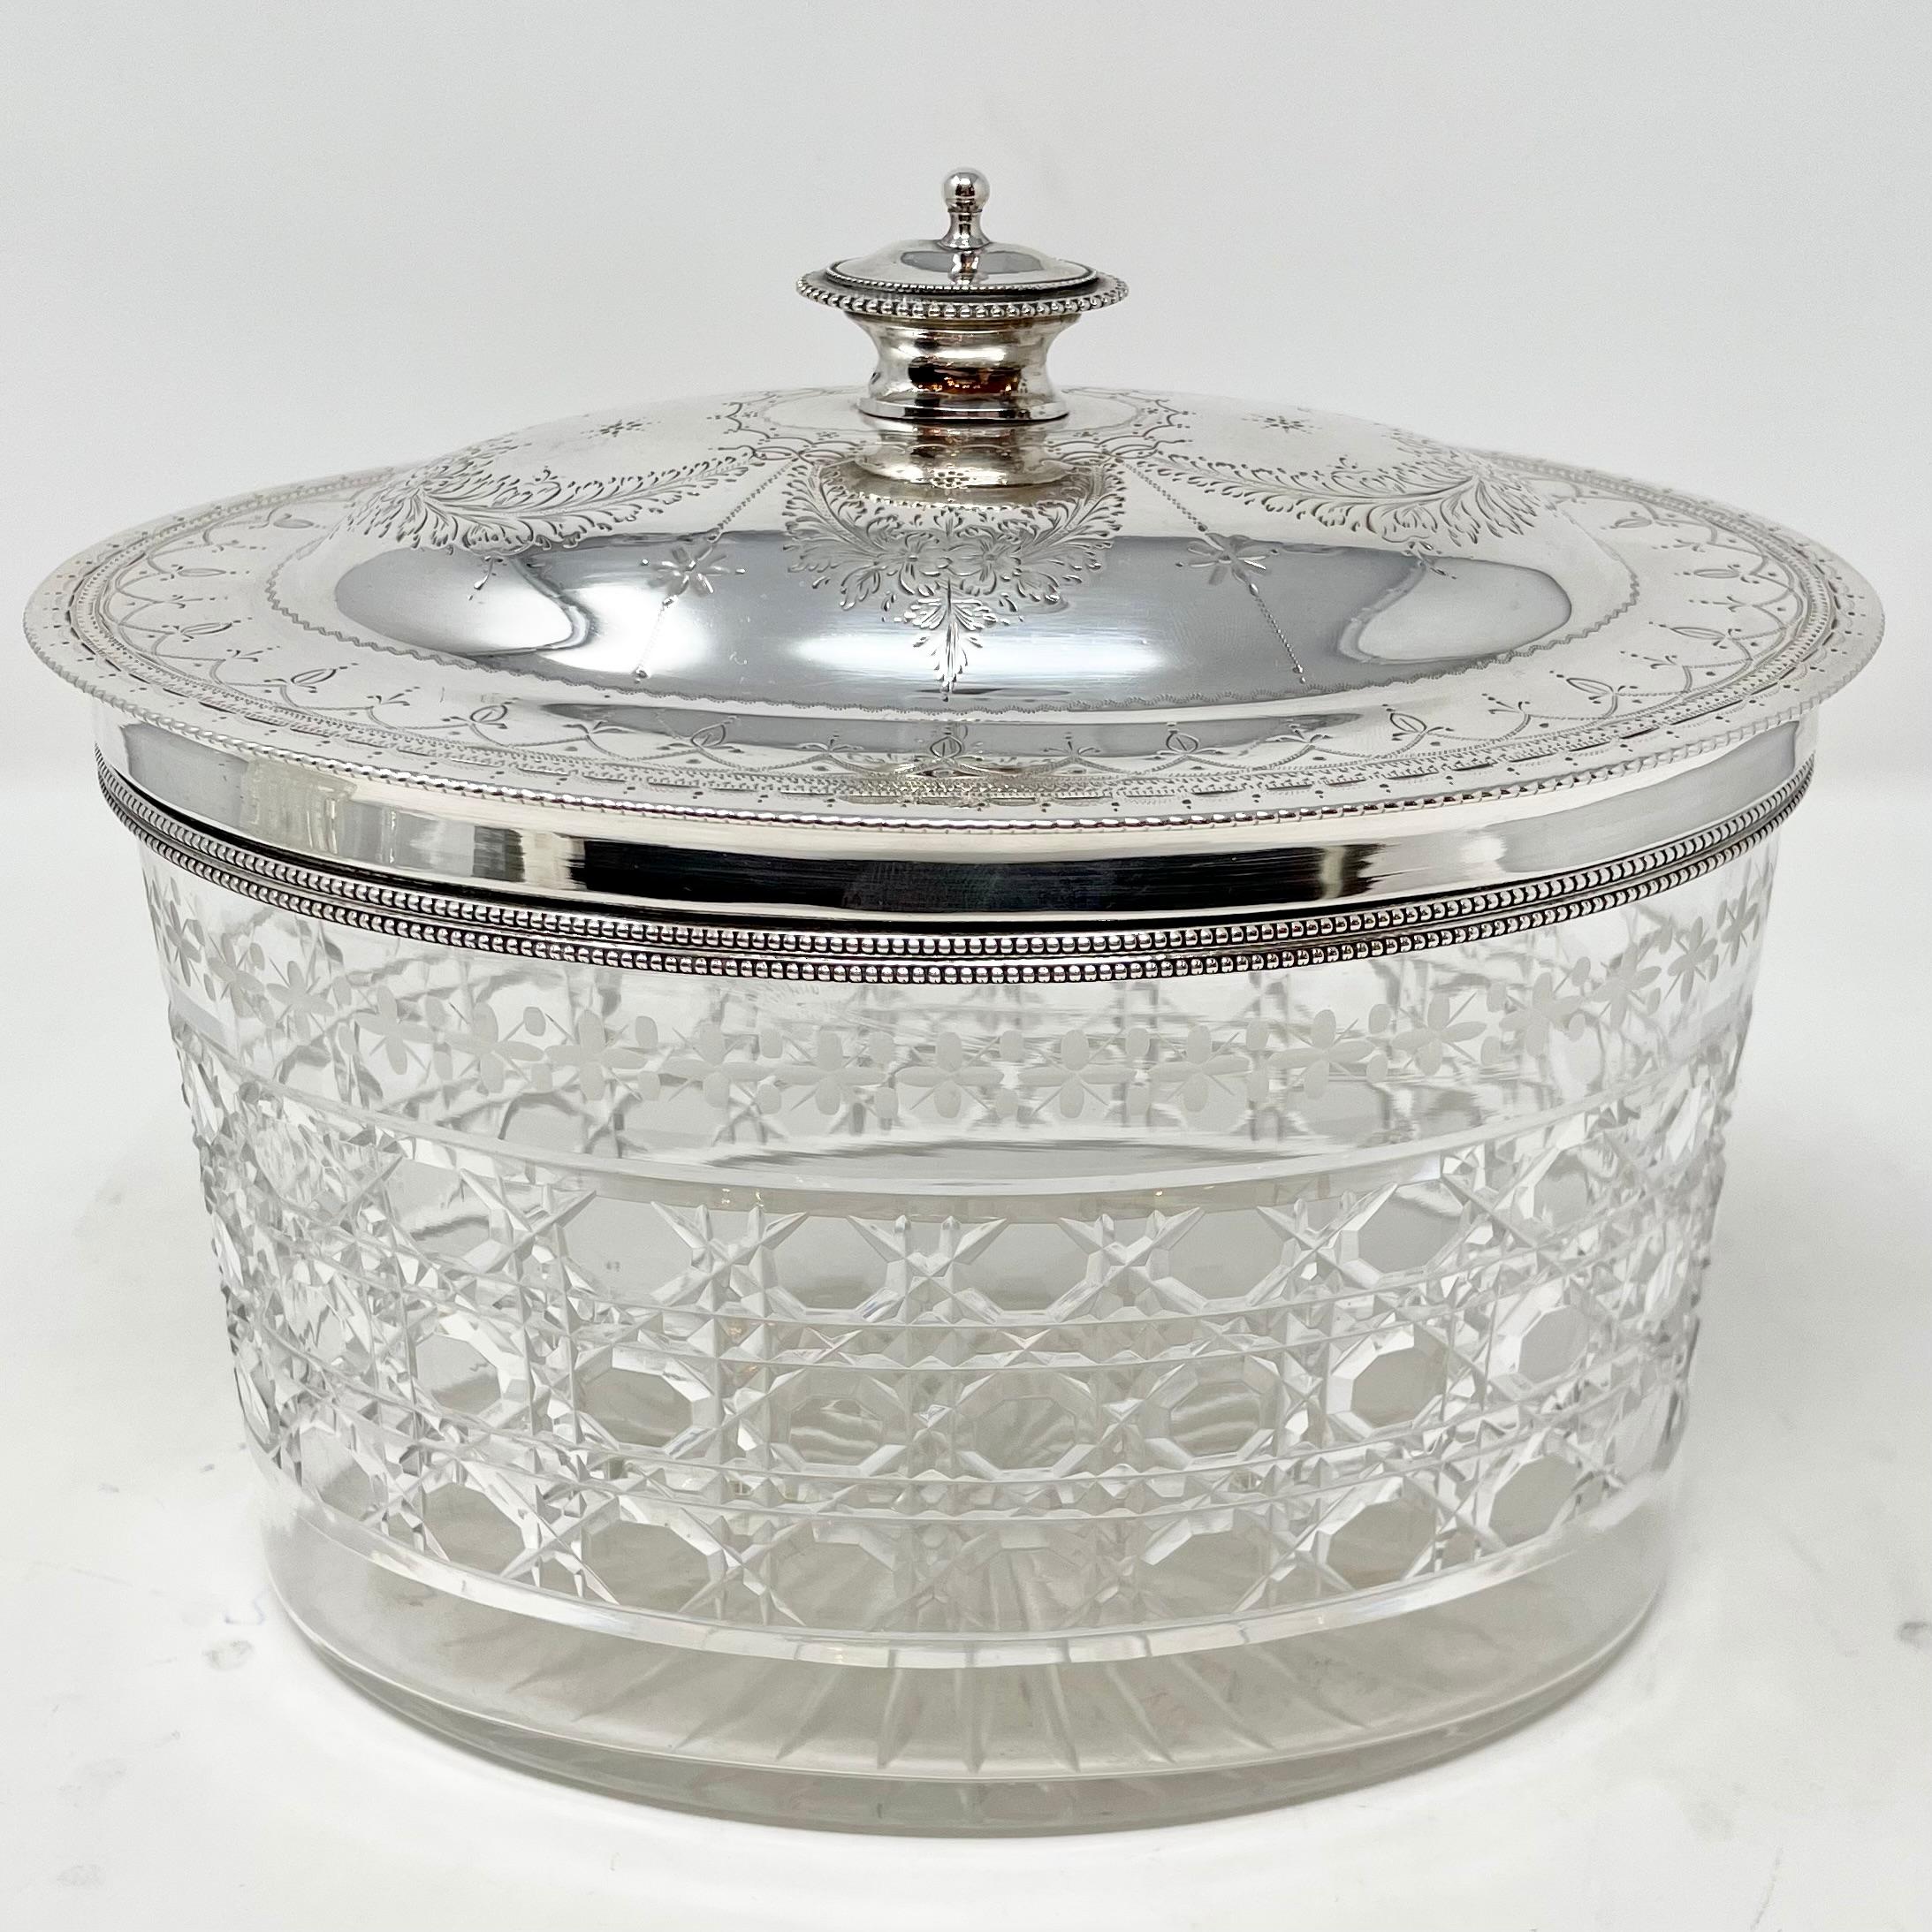 Finest Antique English Cut Crystal & Silver-Plate Drinks and Biscuit Tantalus on Fitted Tray, Hallmarked 